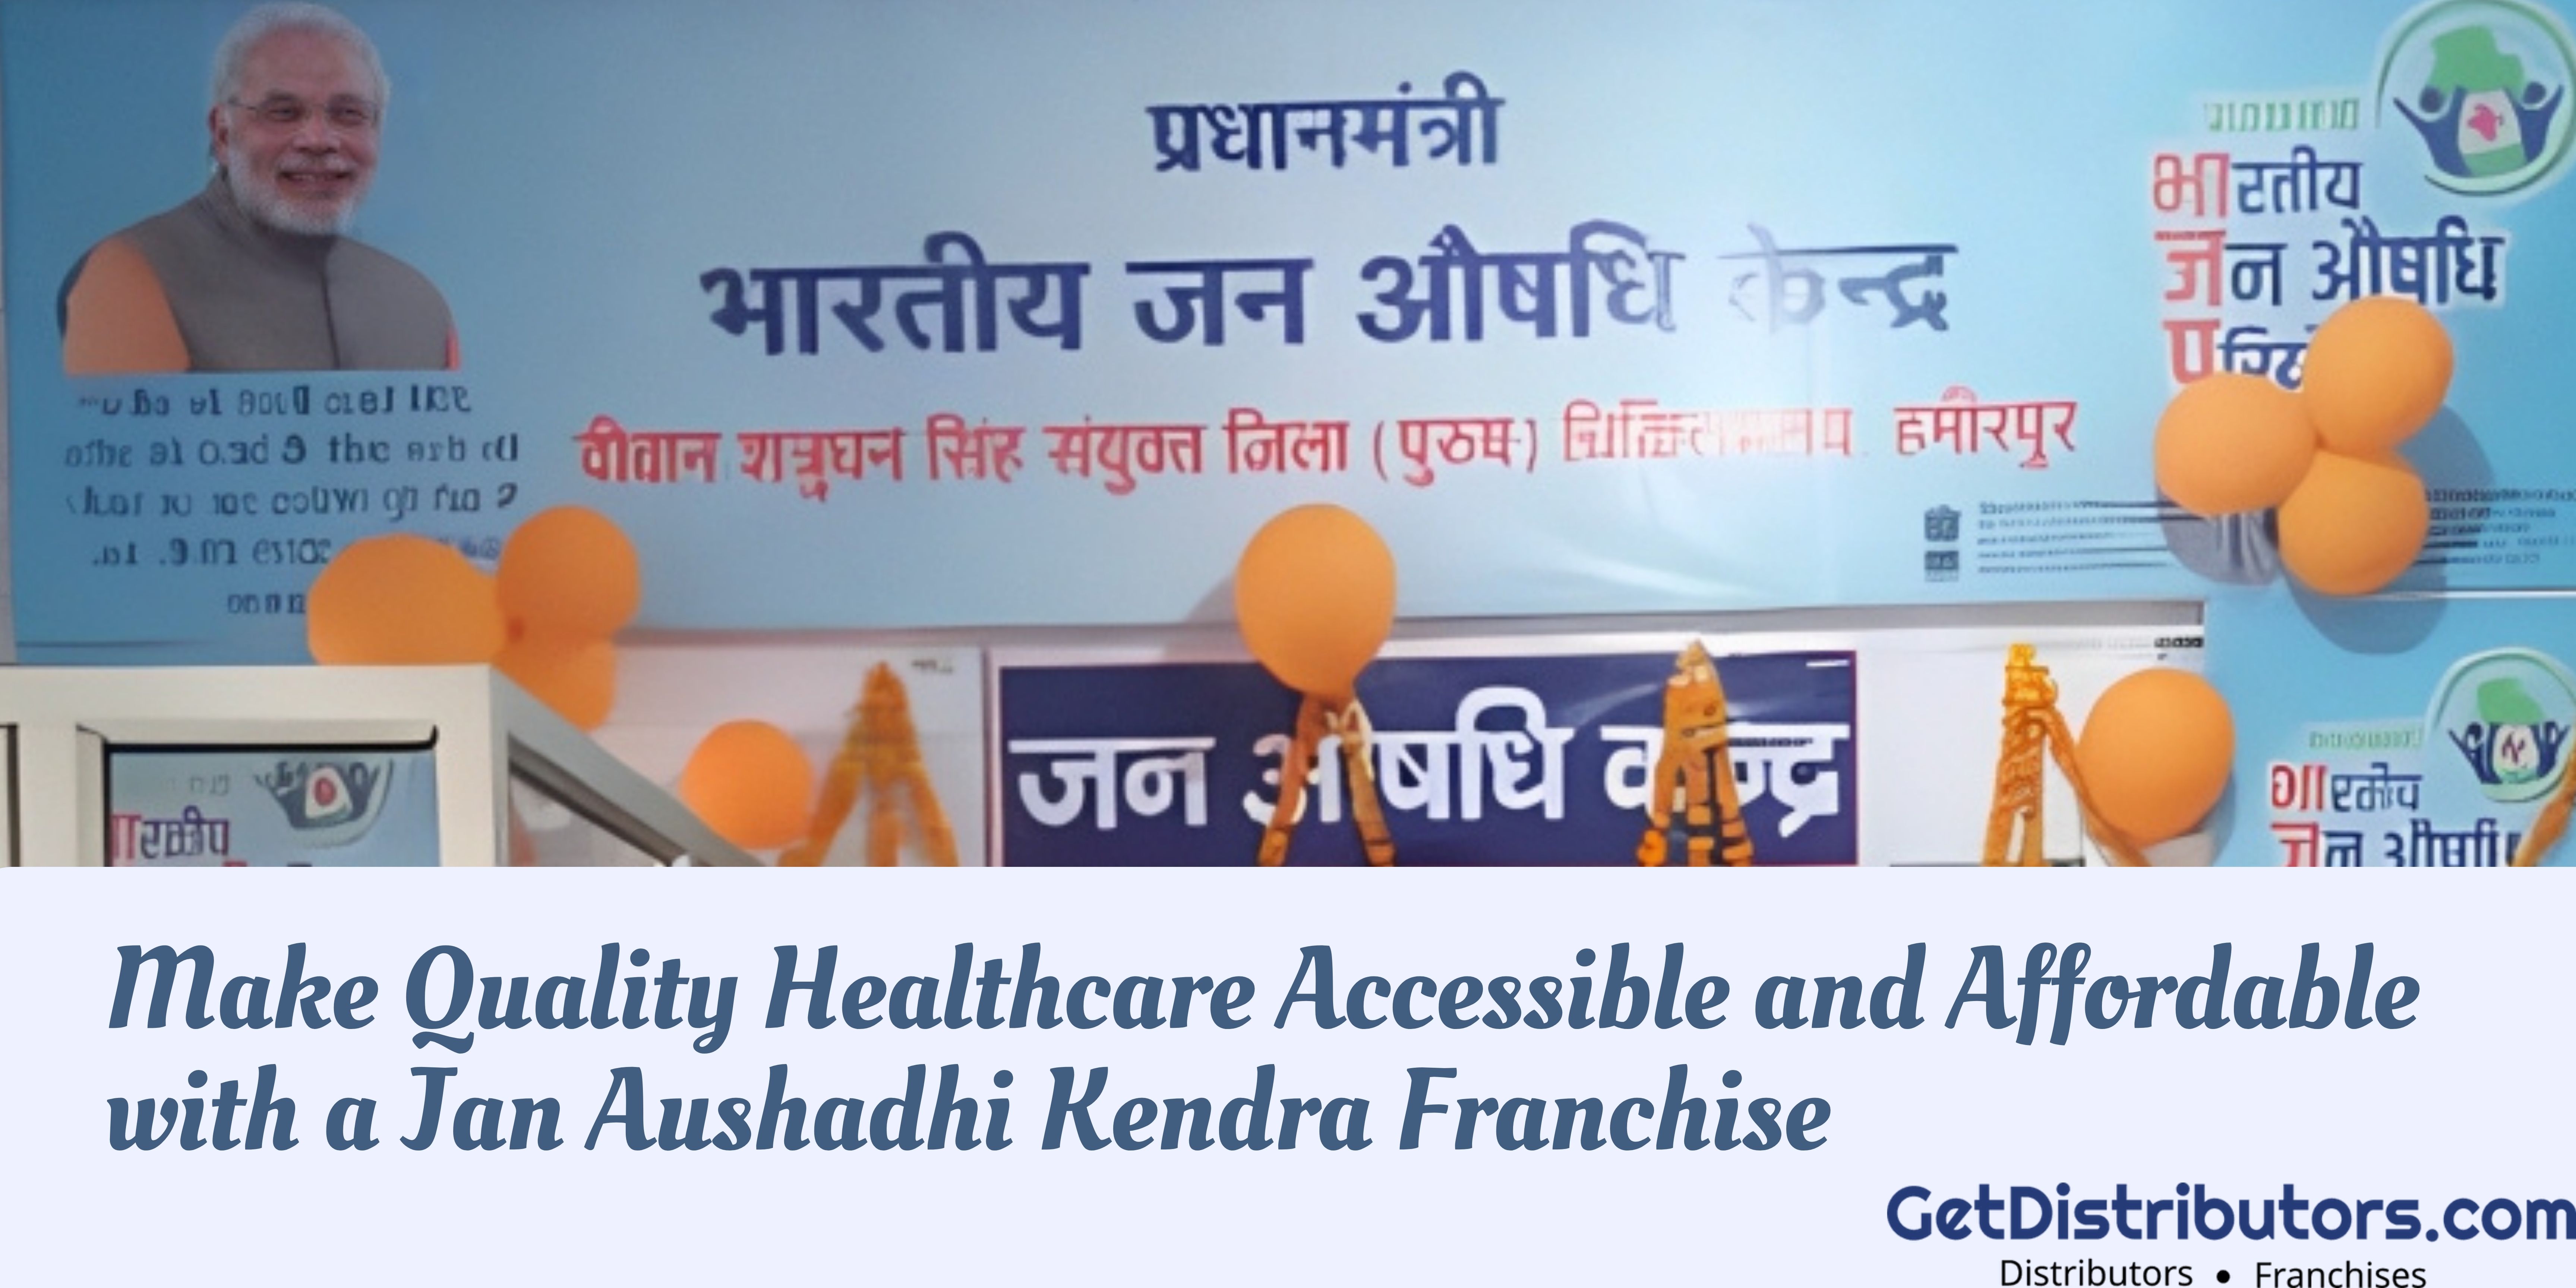 Make Quality Healthcare Accessible and Affordable with a Jan Aushadhi Kendra Franchise